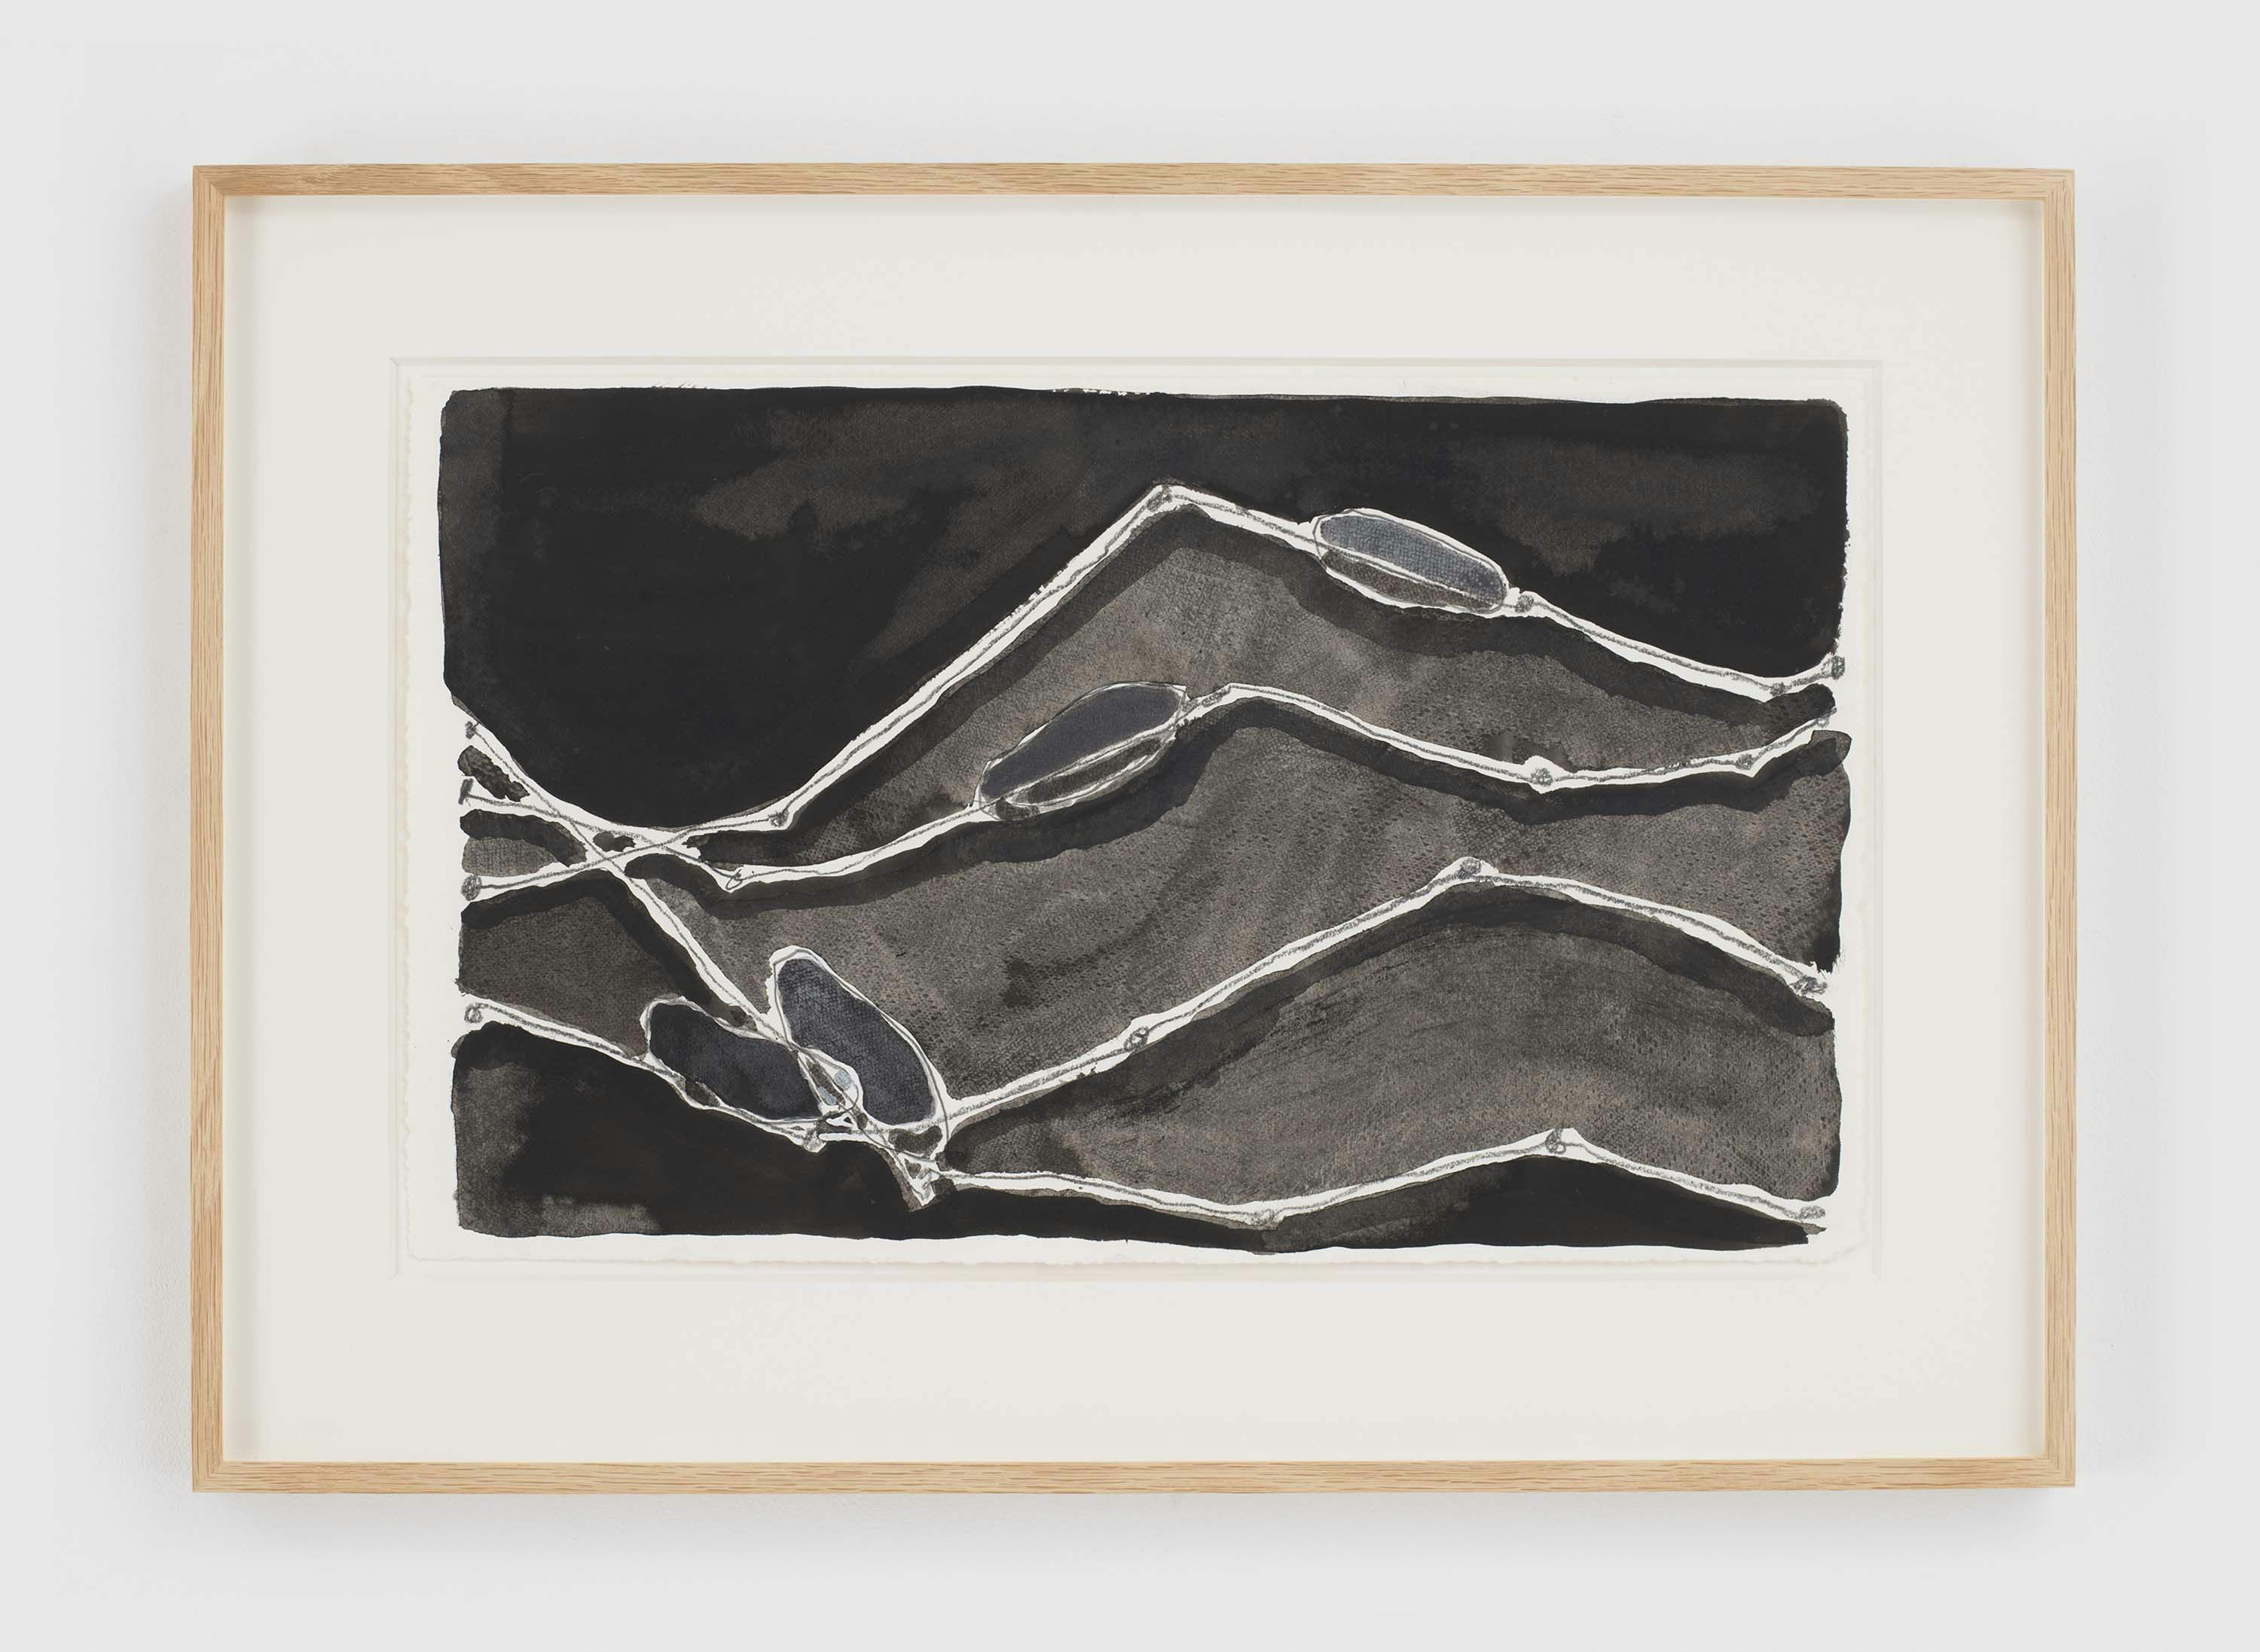 A graphite, gouache, ink, and acrylic mica mortar drawing on paper by Al Taylor, titled Wave Theory with Fish Floats (Rough Side), dated 1998. 